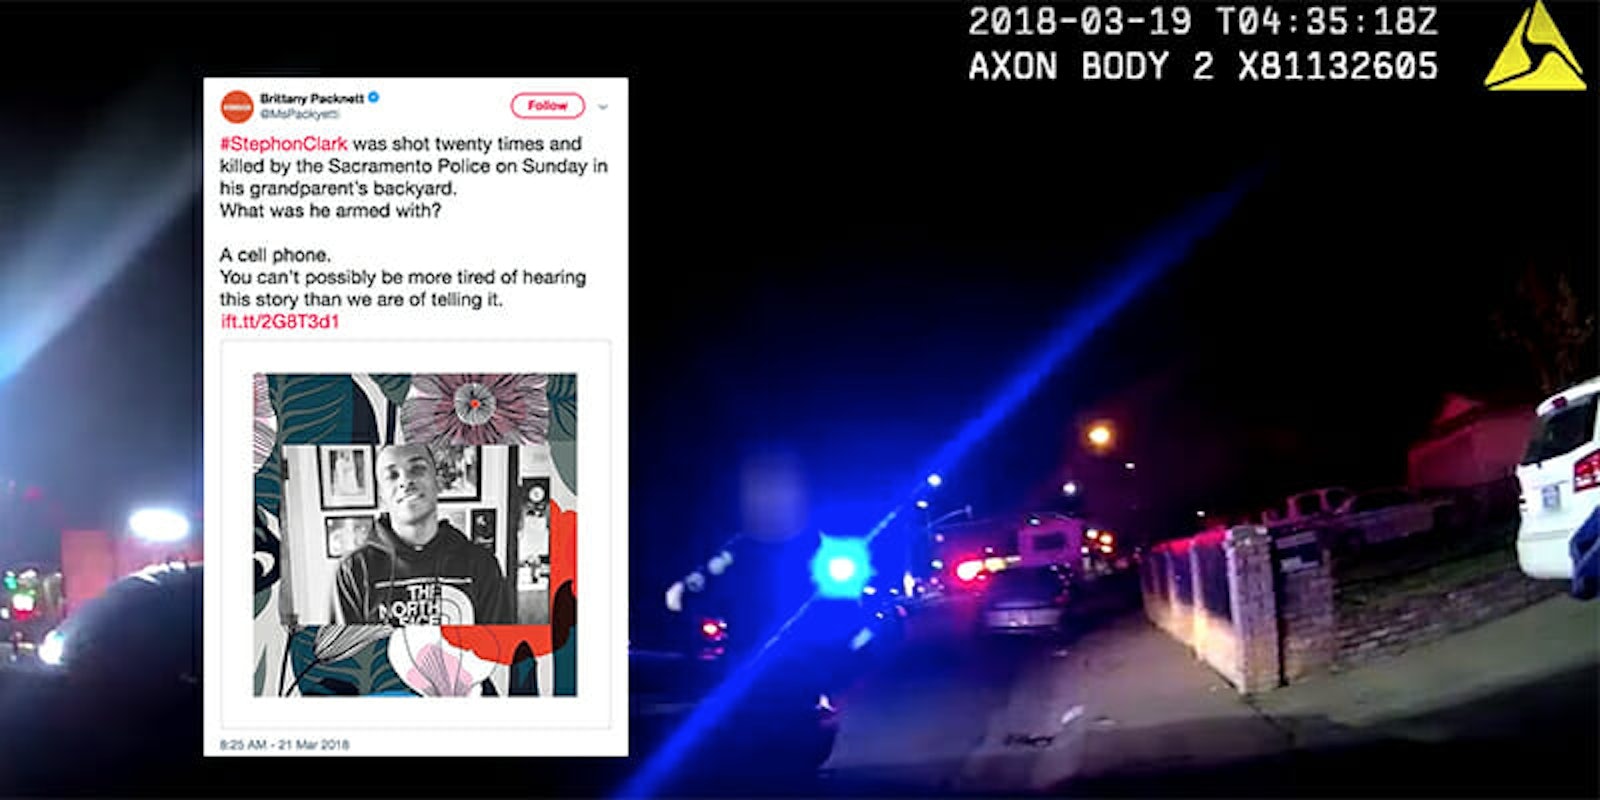 Police muted their body cameras after fatally shooting 22-year-old Stephon Clark, a Black man who was unarmed, body camera footage shows.